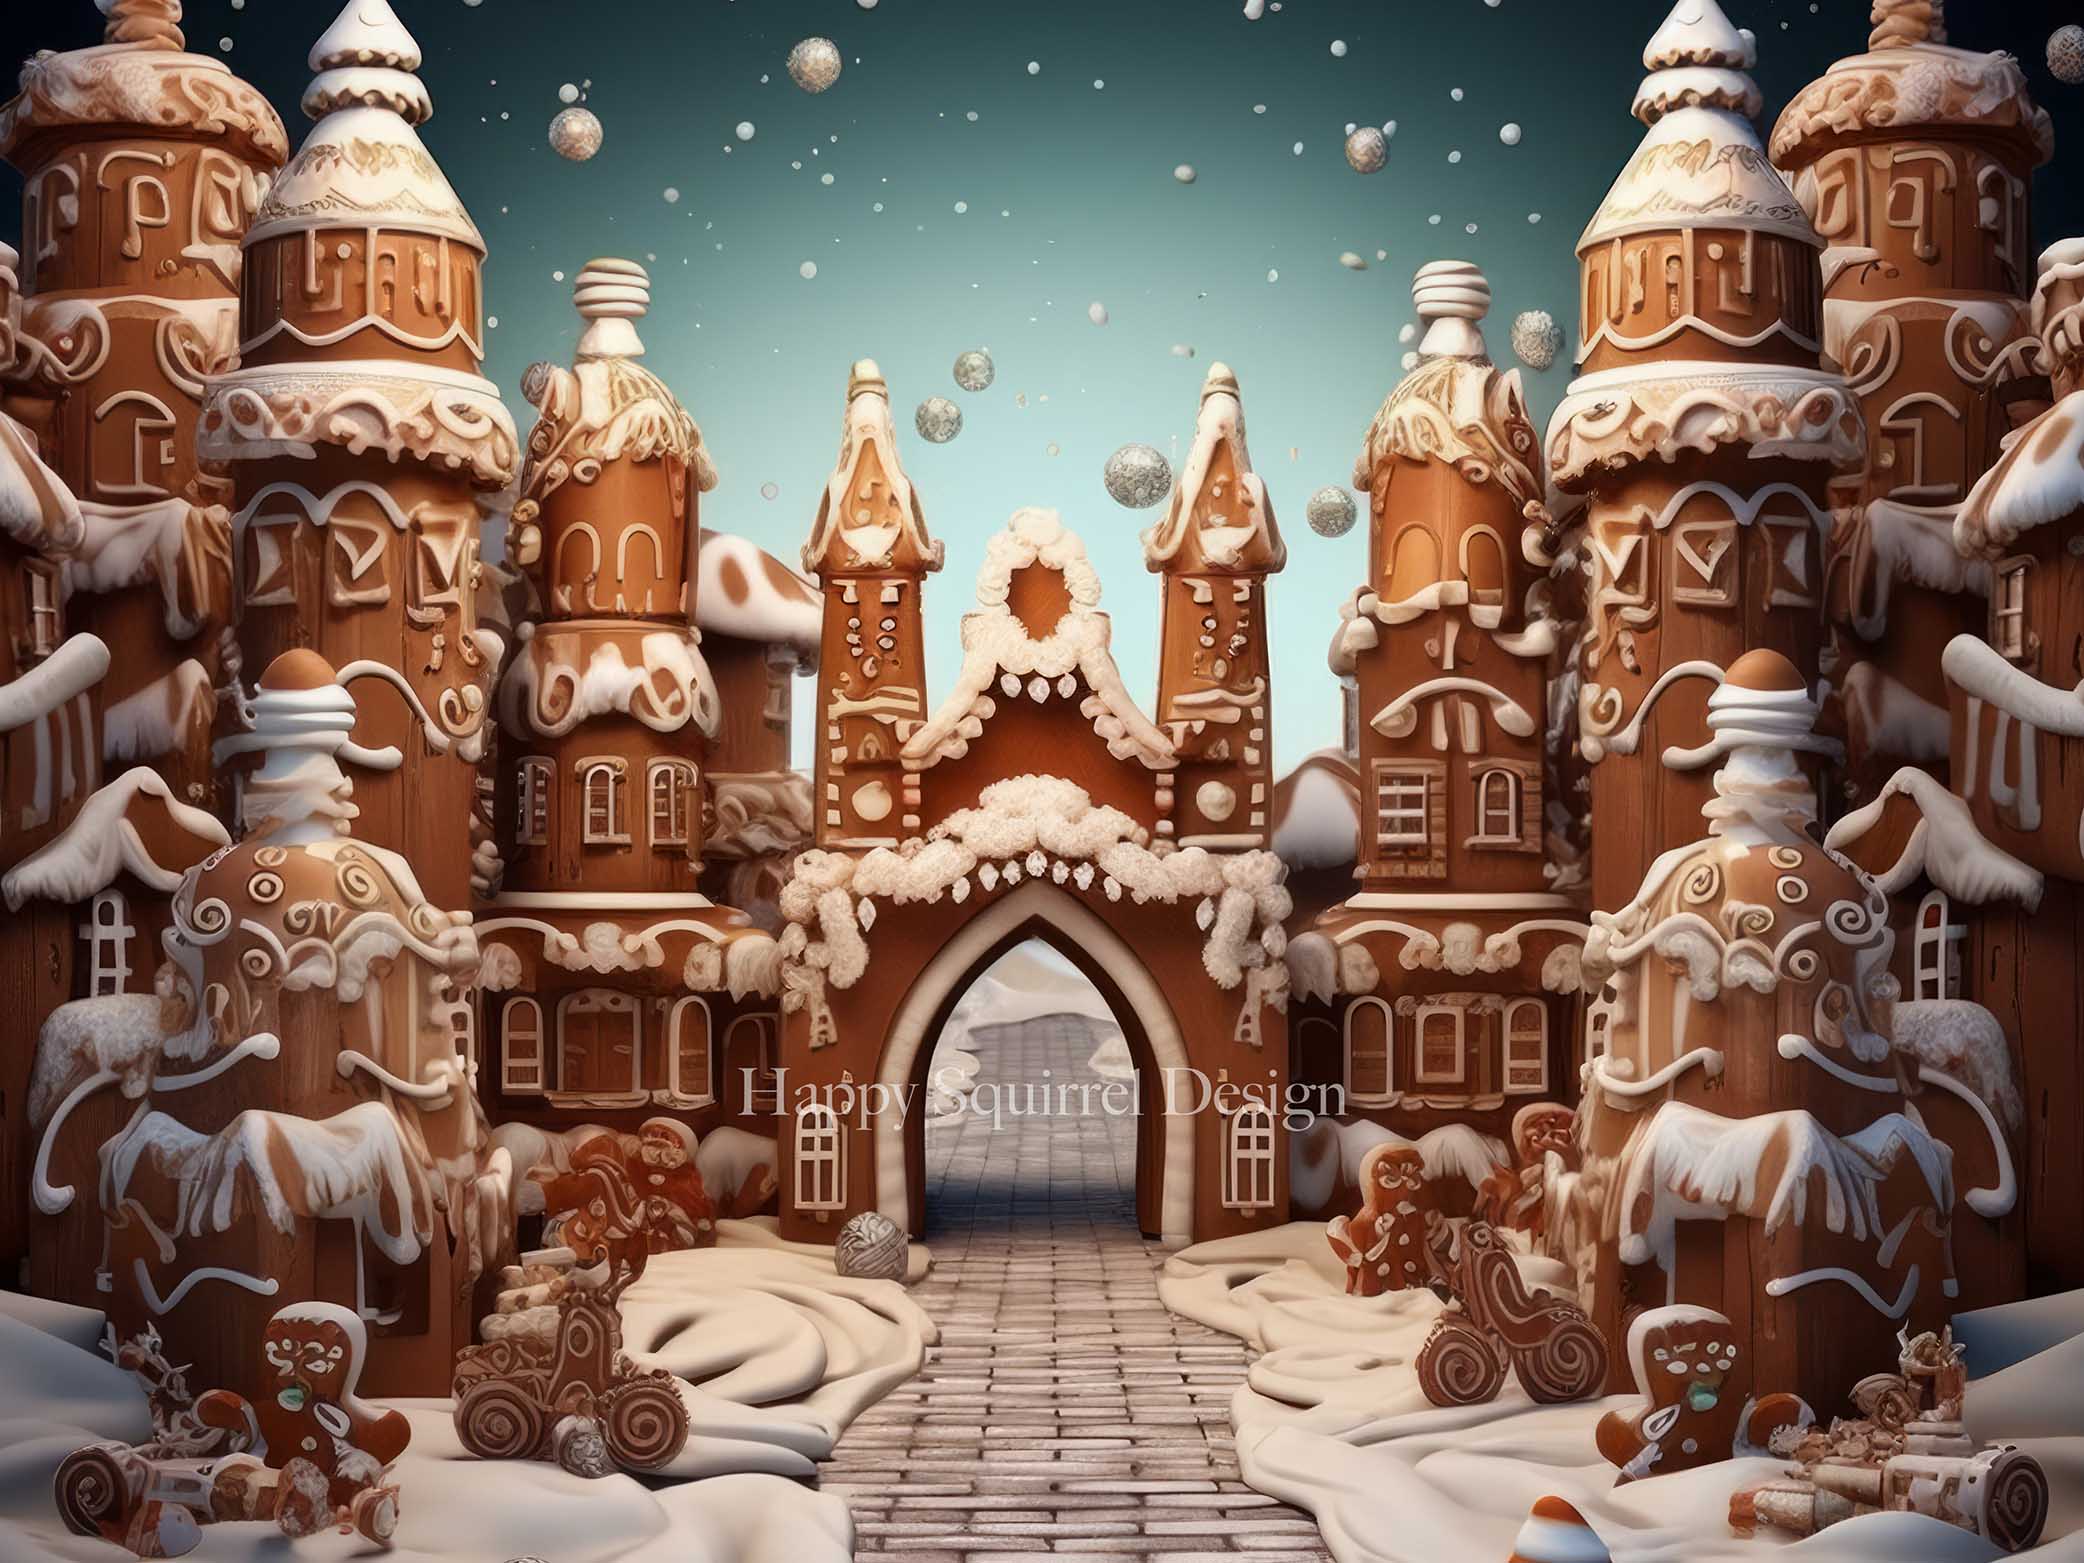 Kate Christmas Gingerbread Castle Backdrop Designed by Happy Squirrel Design